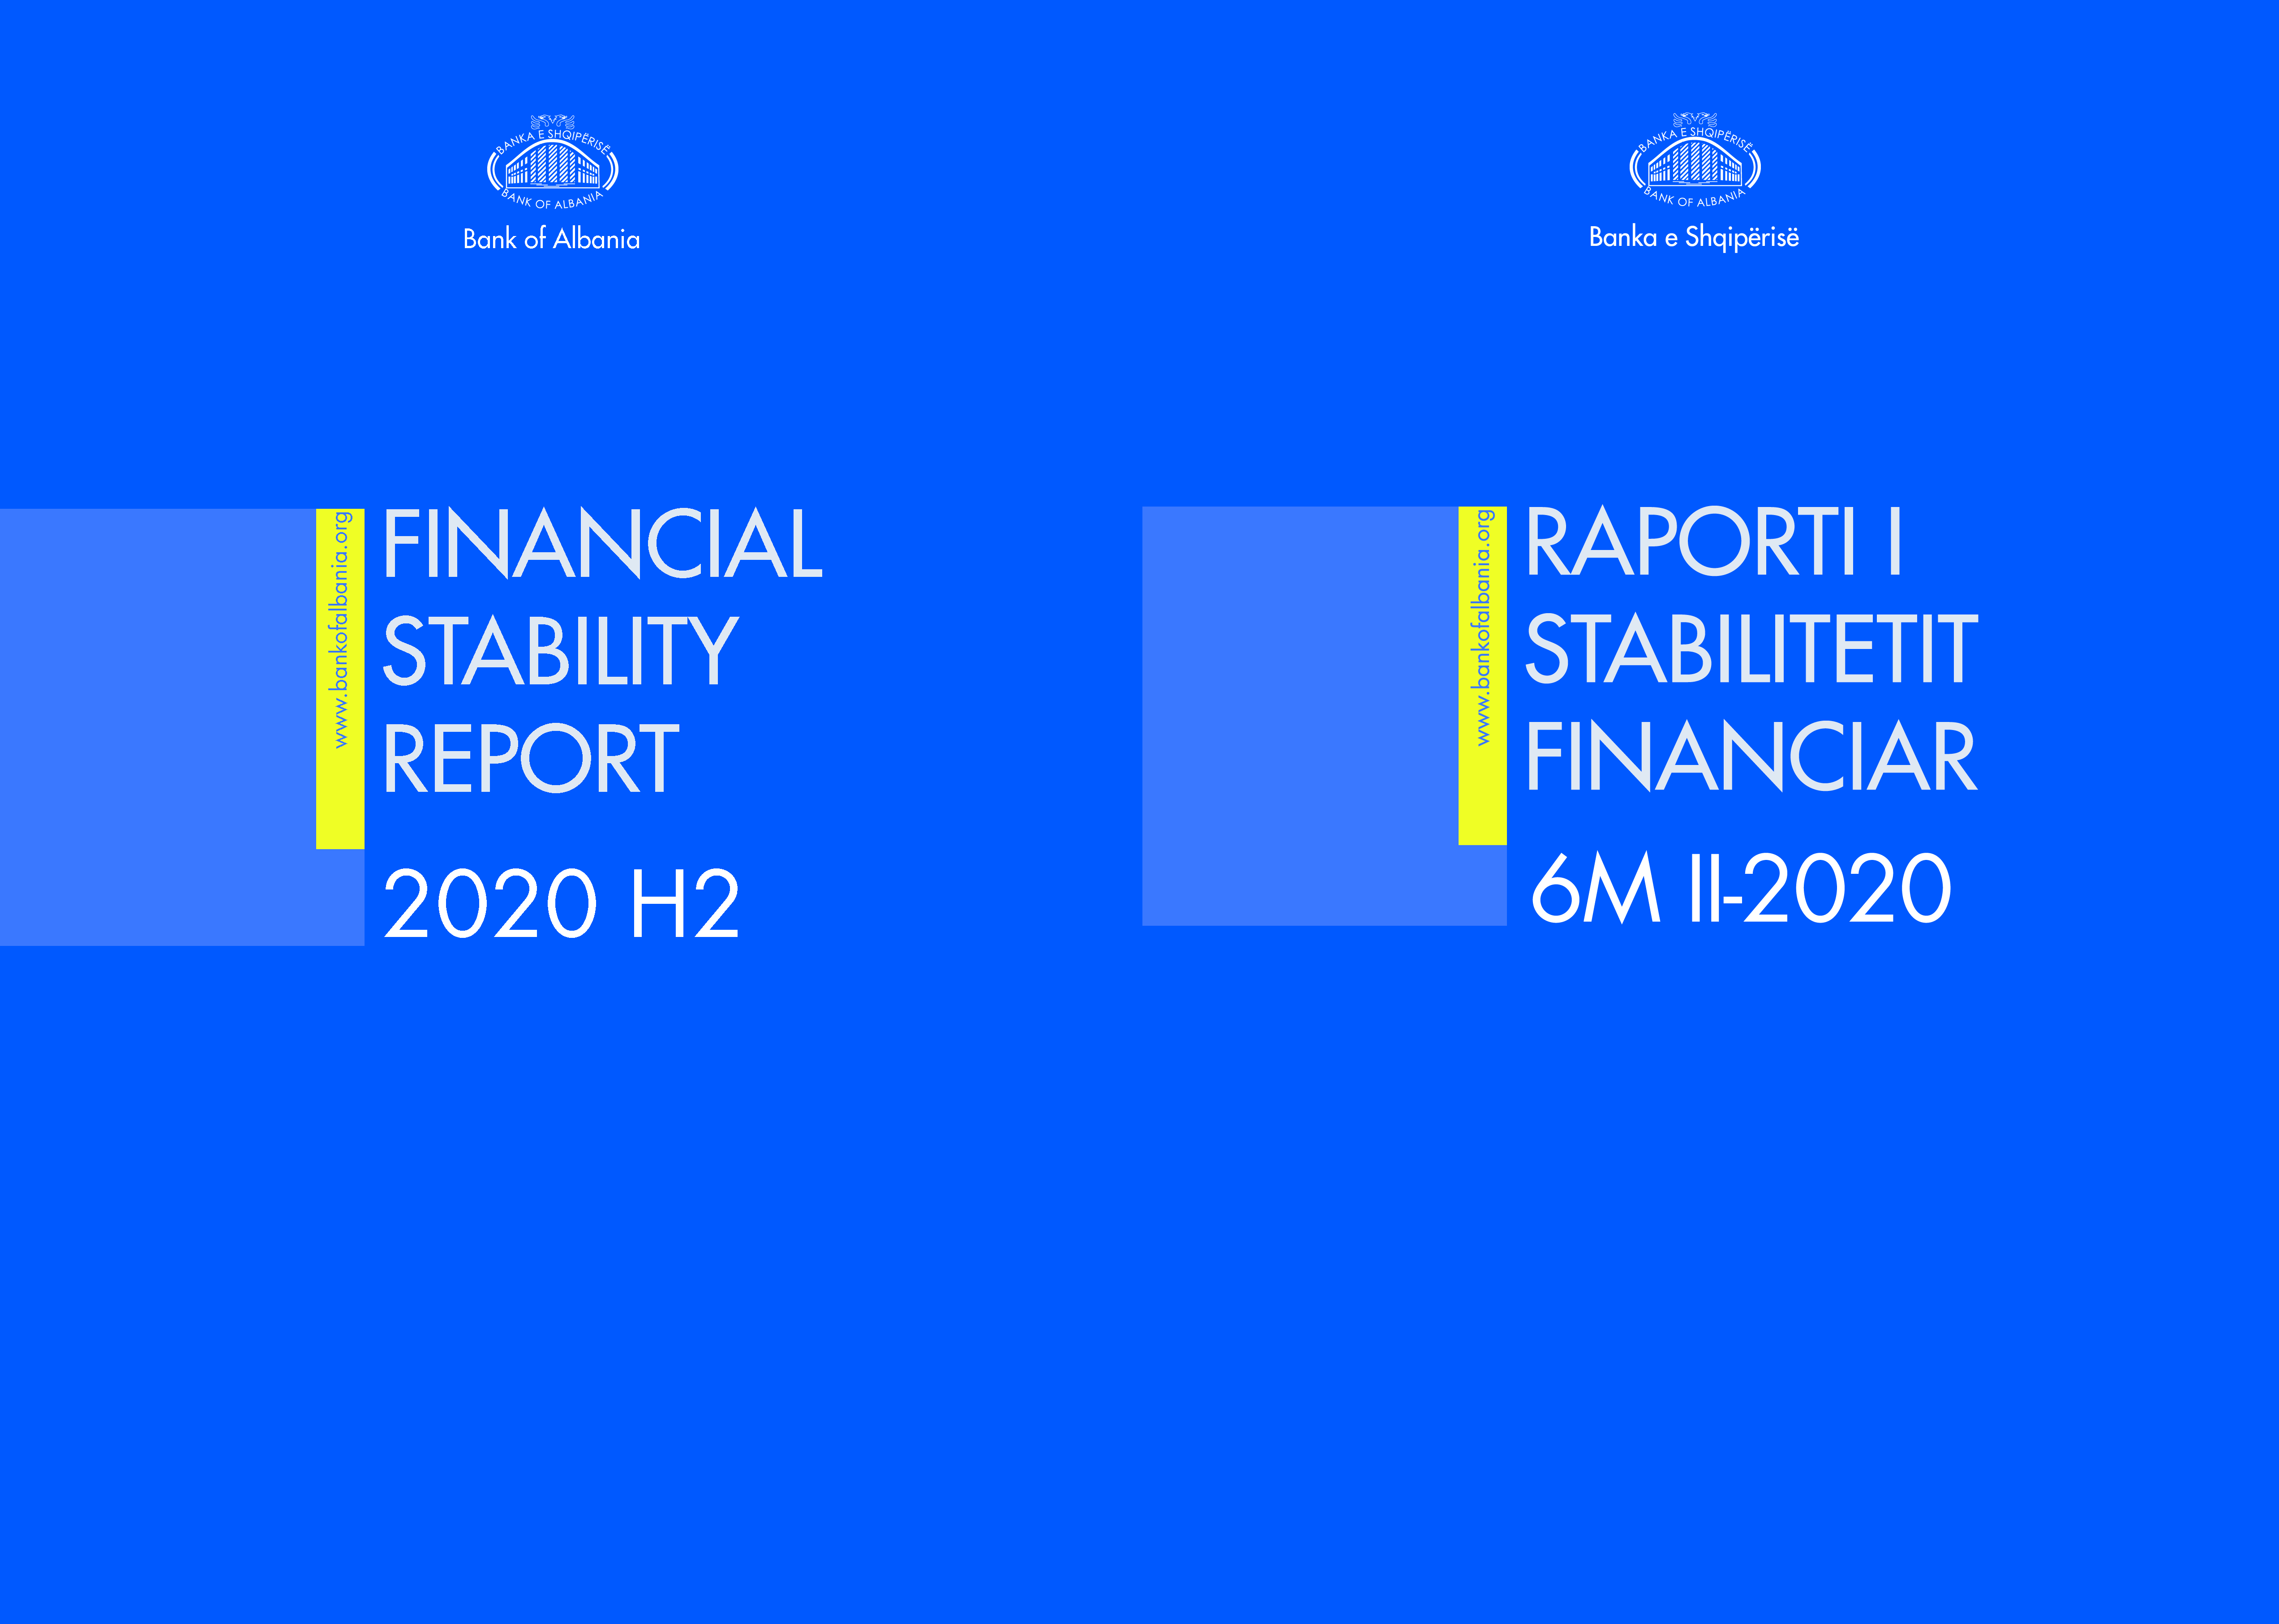 Financial Stability Report - 2020 H2